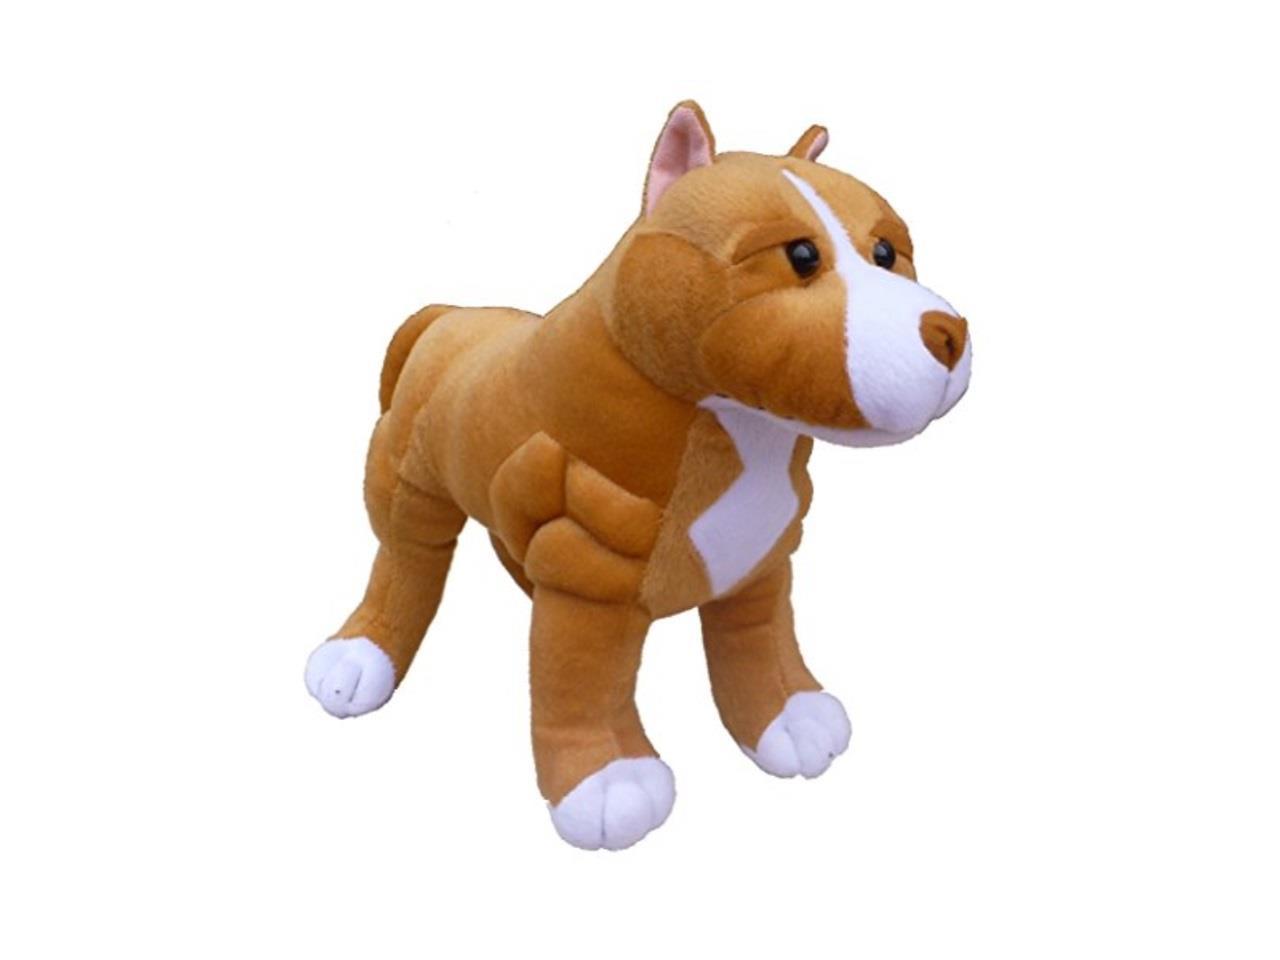 Details about   Adore 13" Standing Boss The Pit Bull Dog Plush Stuffed Animal Toy